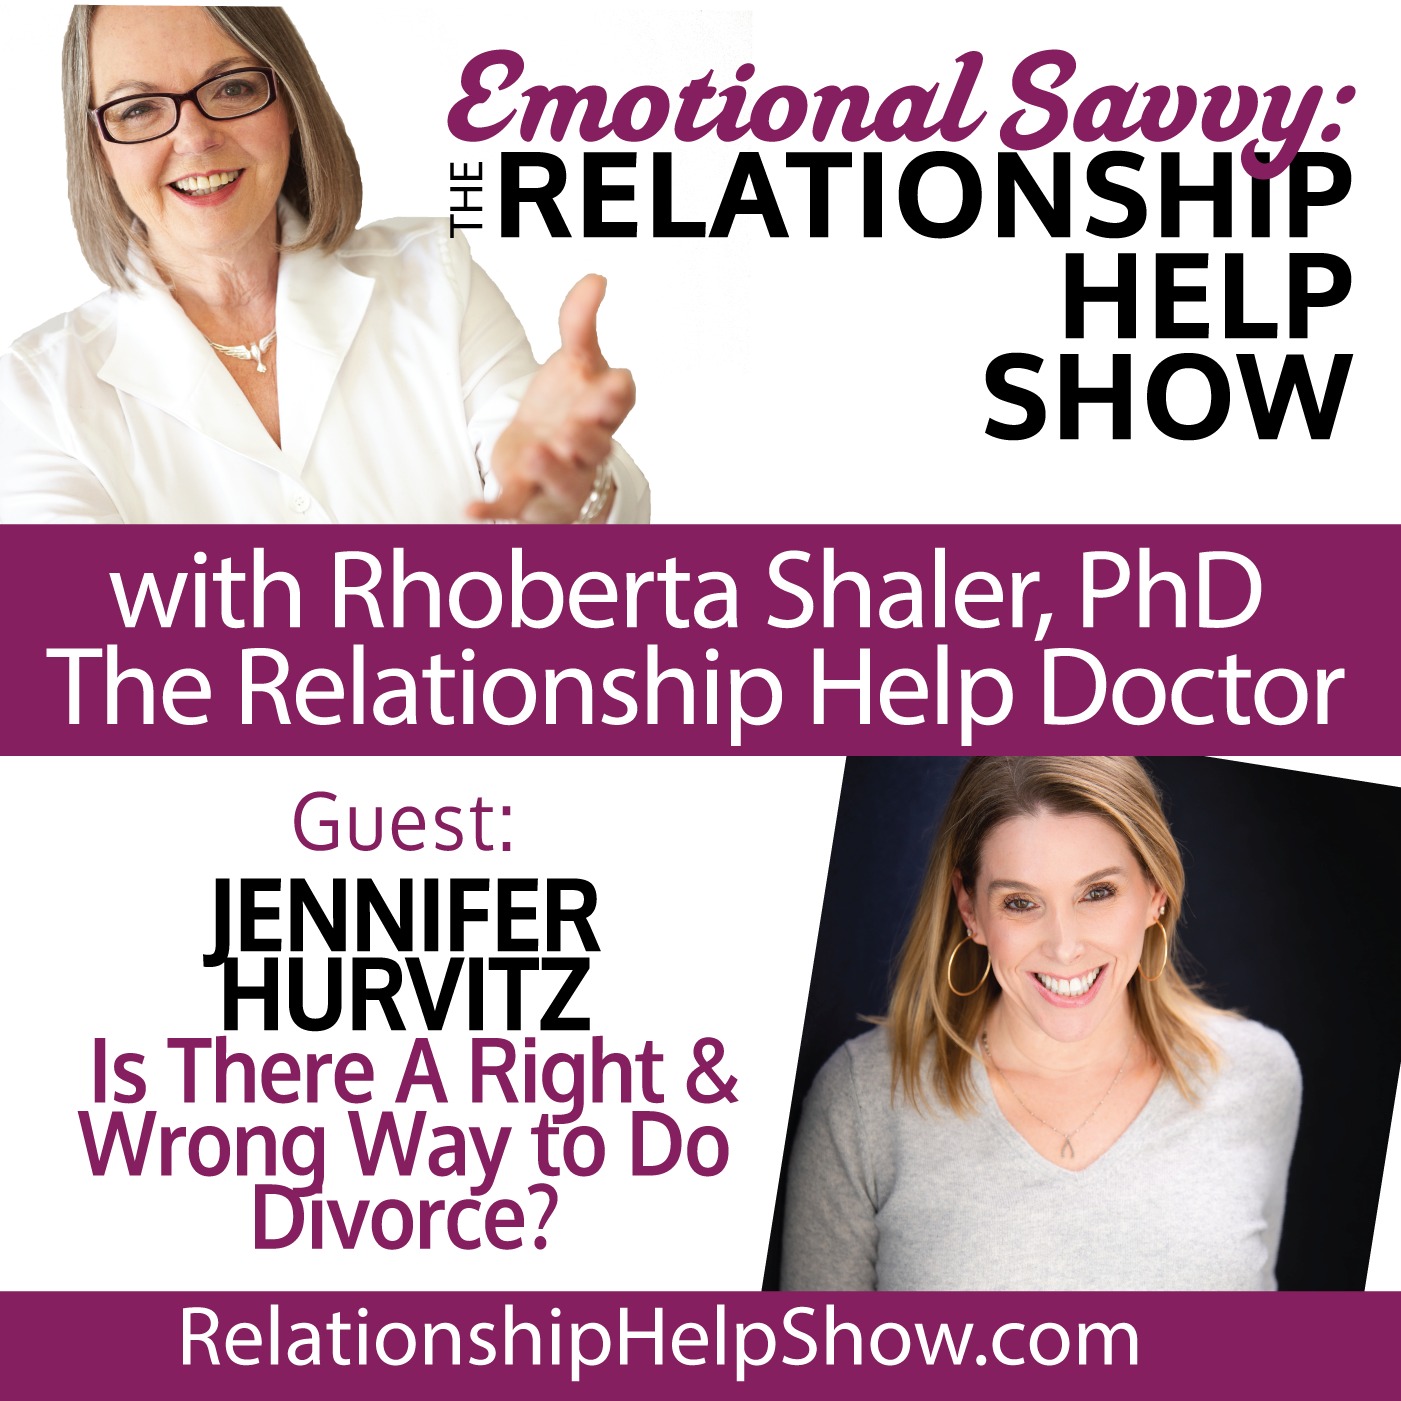 Is There a Right Way or Wrong Way to Divorce? GUEST: Jennifer Hurvitz